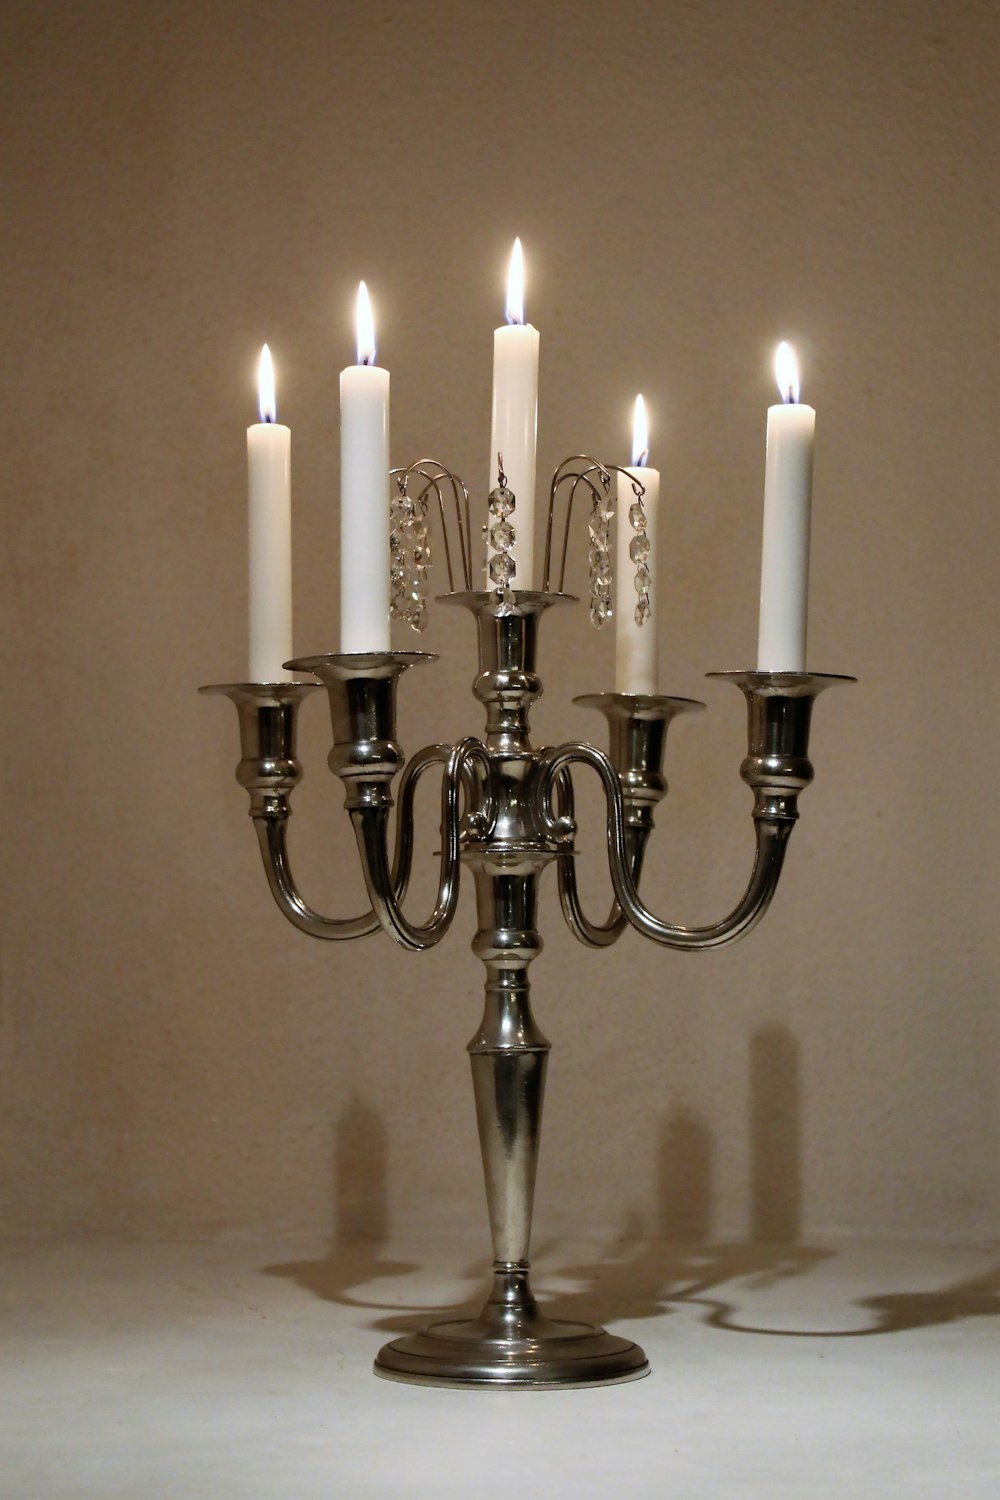 A silver candelabra with five lit candles photo – Free Lit candle Image on  Unsplash